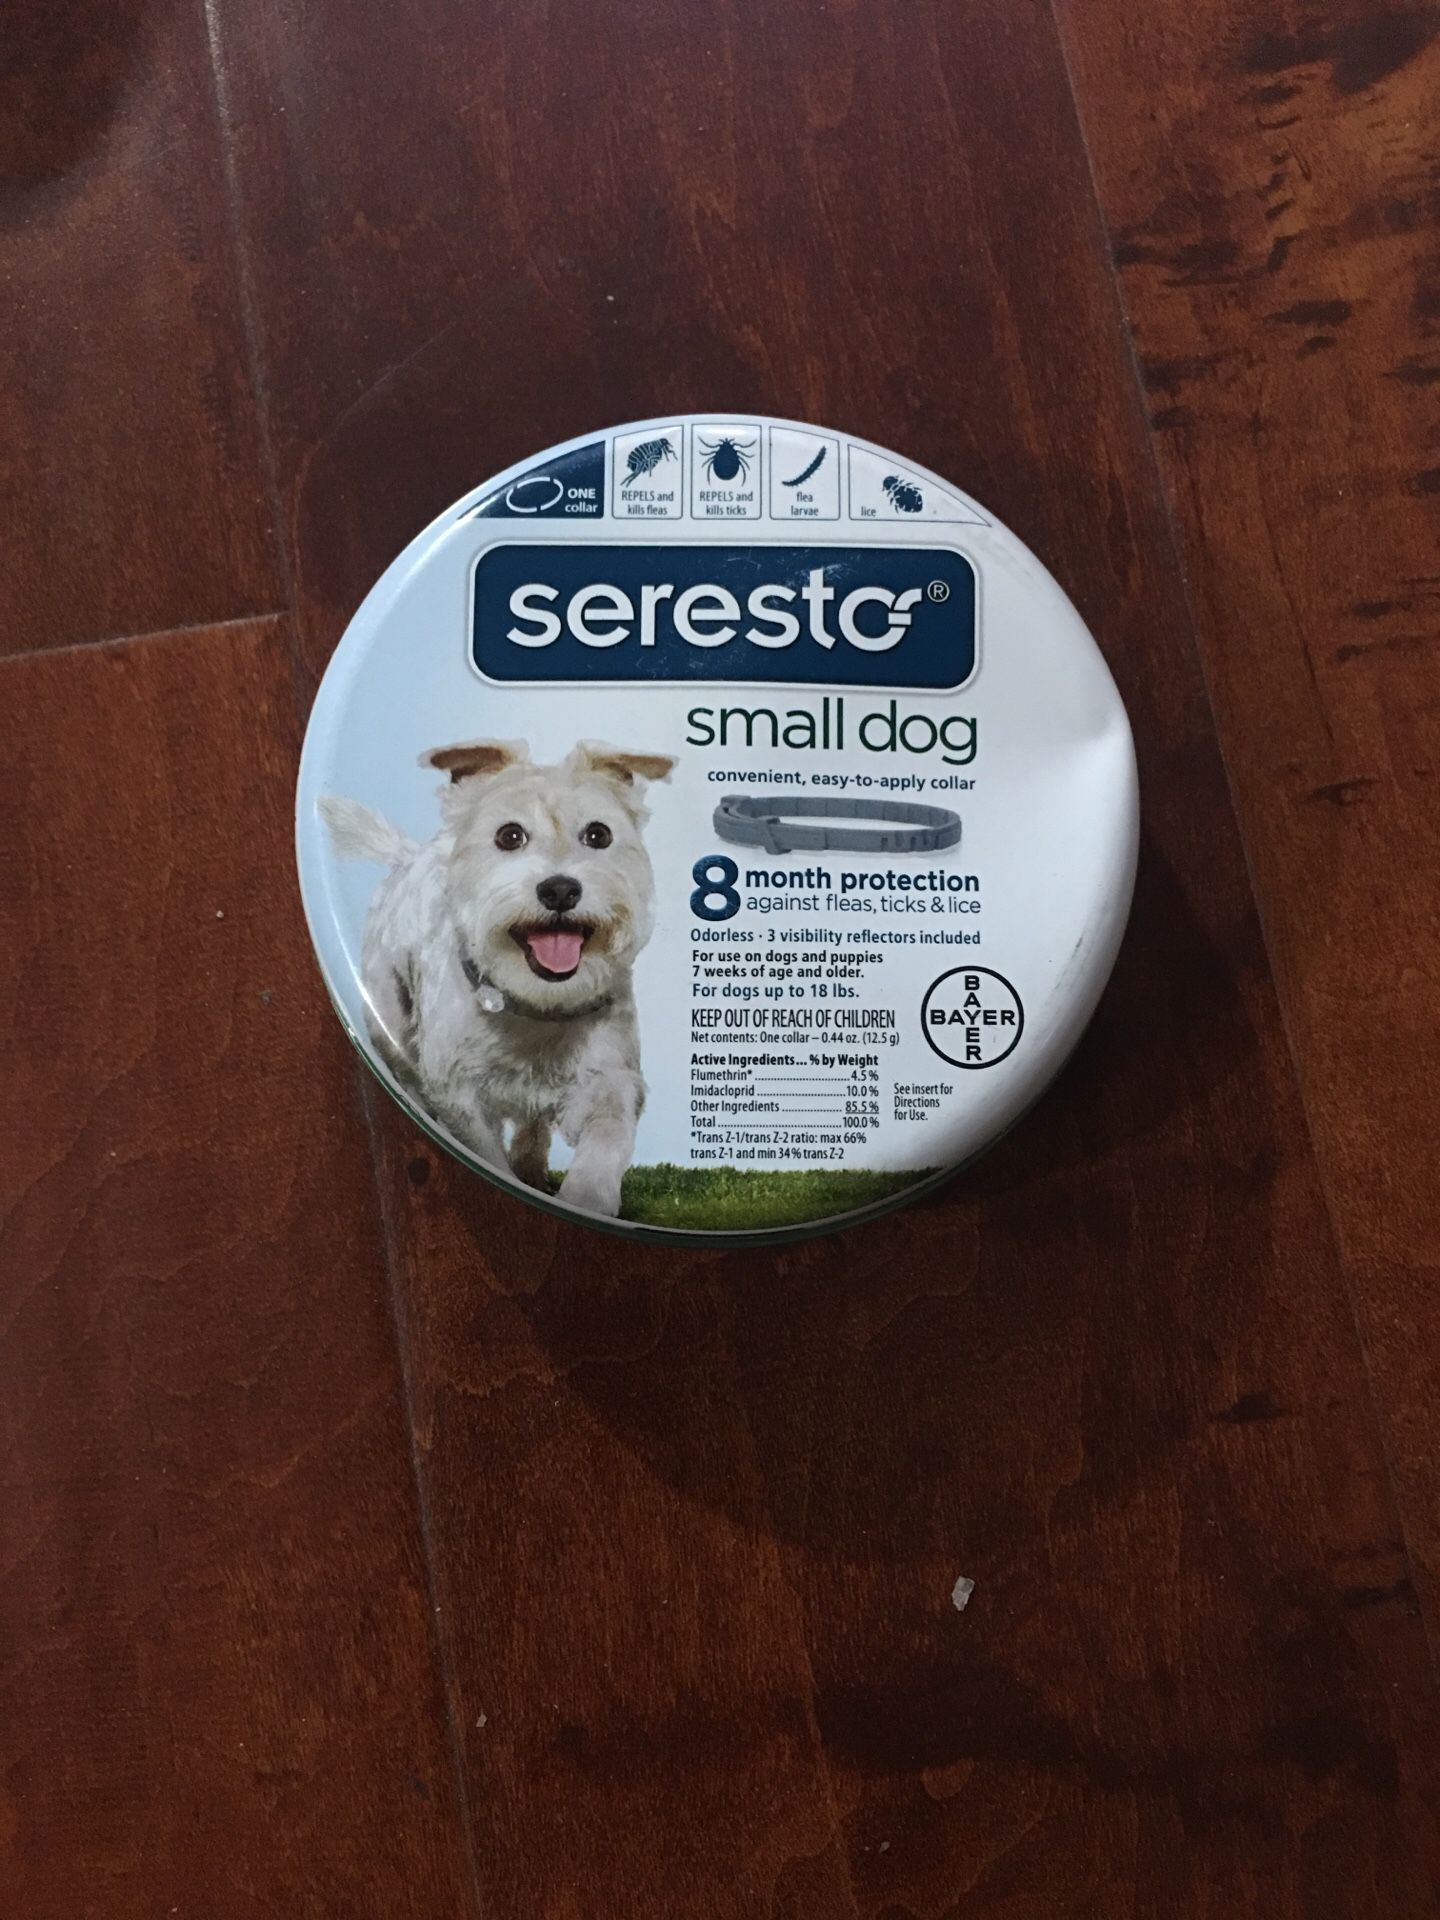 Bayer Animal Health Seresto Flea Tick 8 Month Collar for Small Dogs up to 18lbs new sealed box has dent